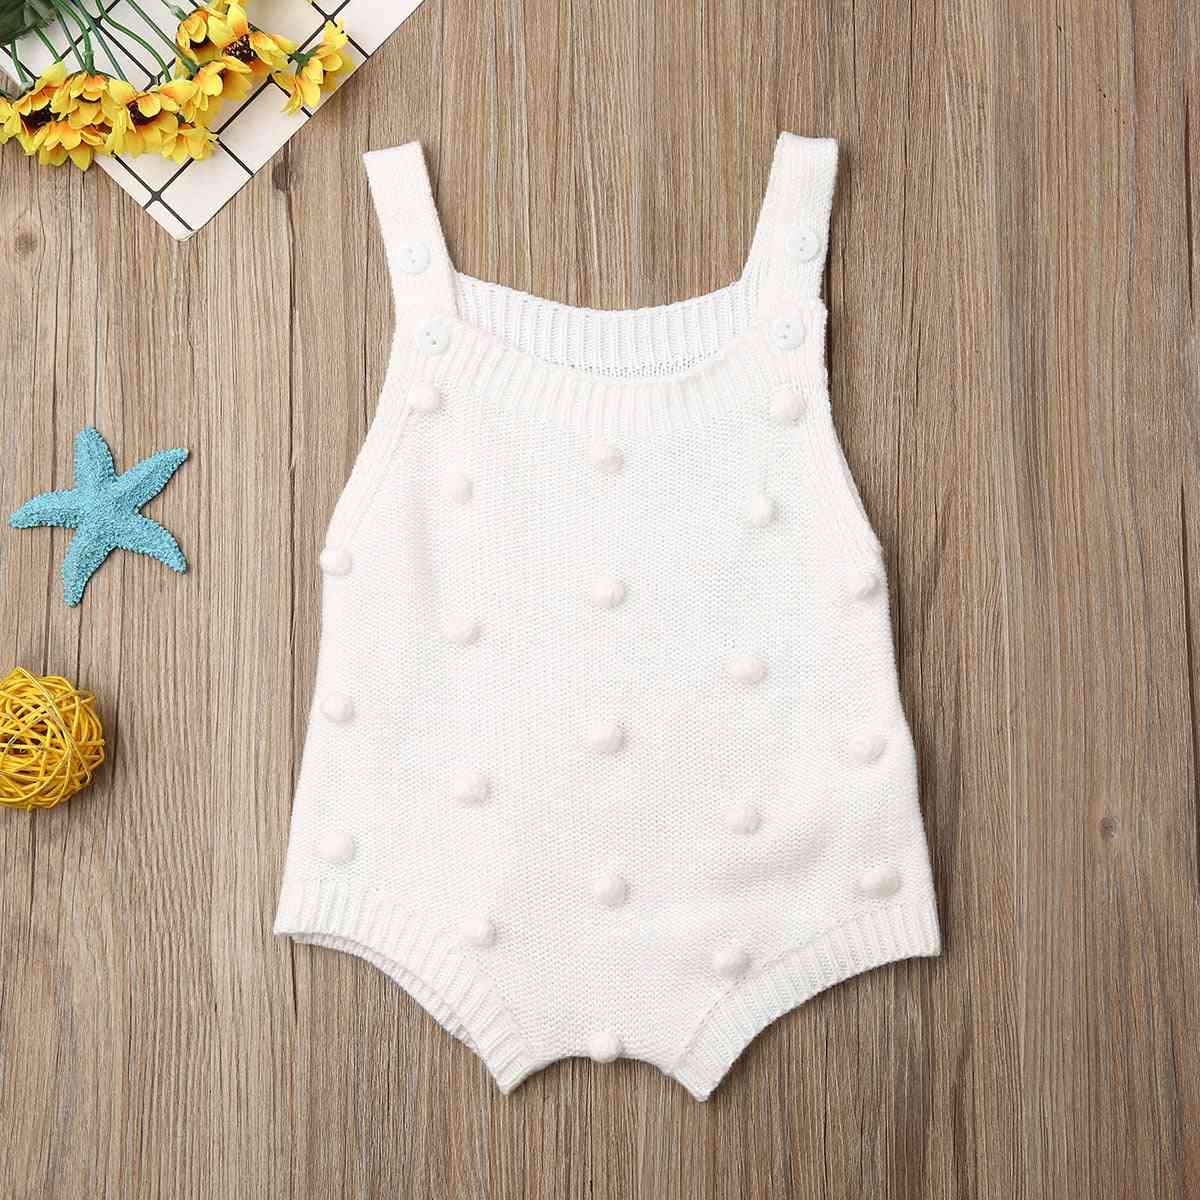 Winter Sweater Sleeveless Jumpsuit Outfits For Baby